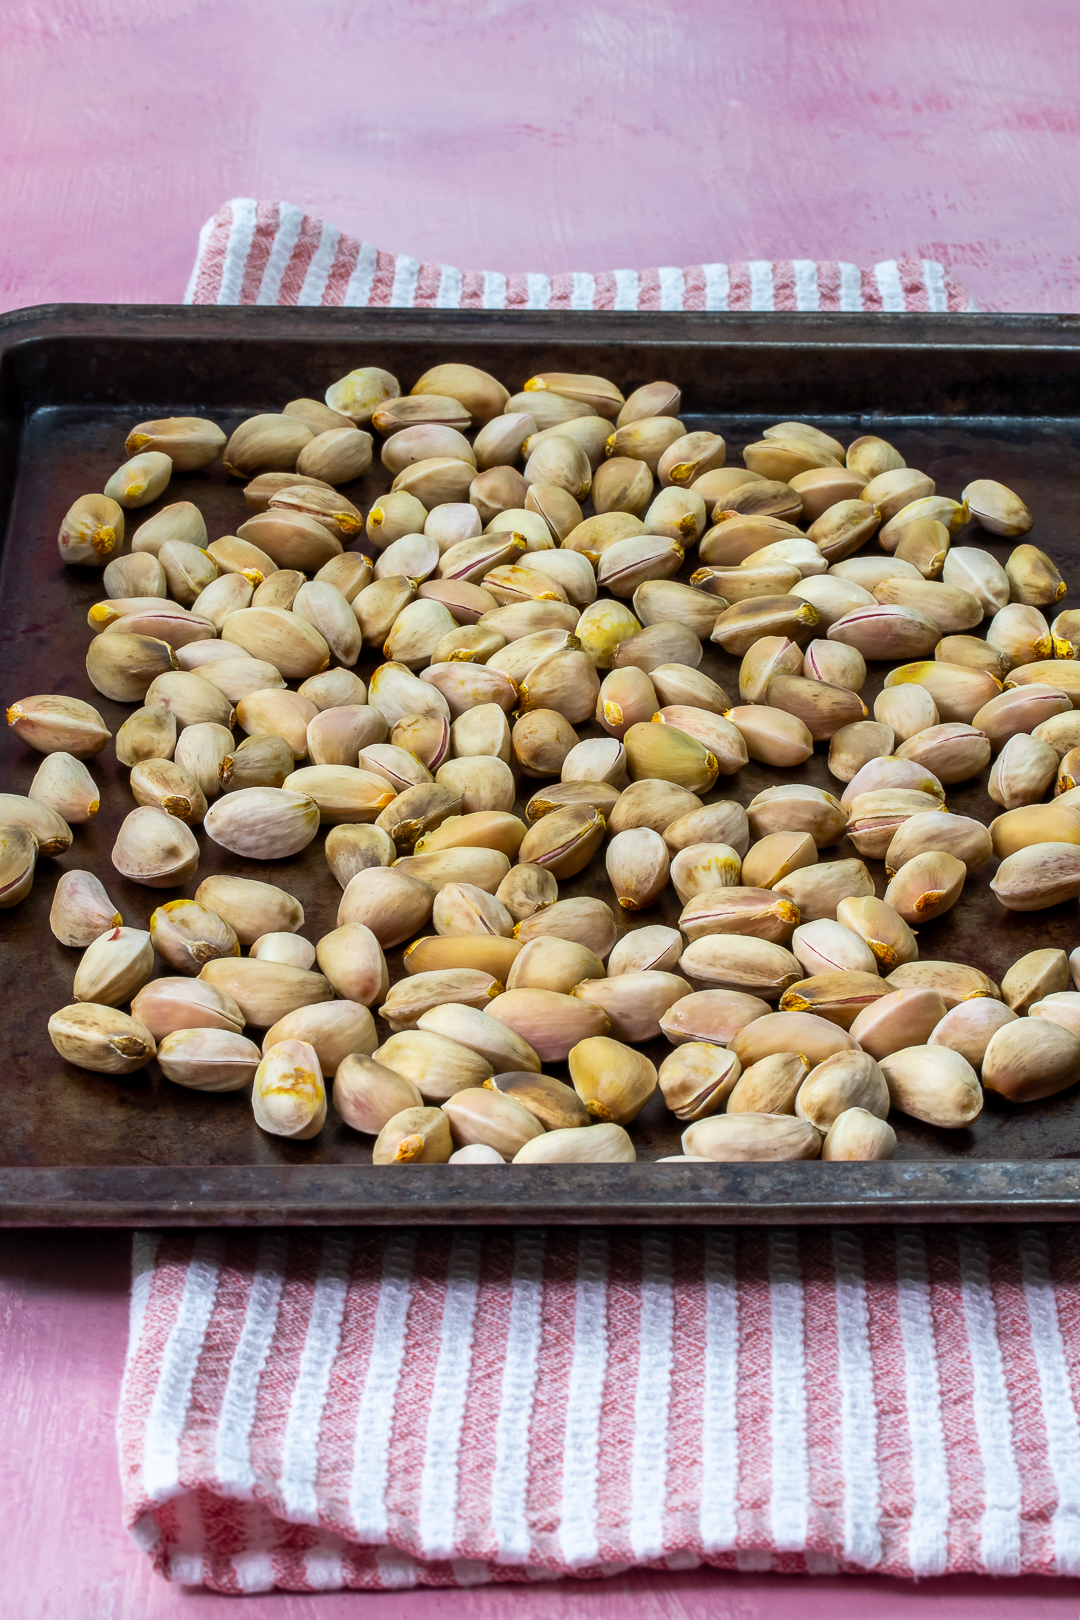 shelled raw pistachios on baking tray for making pistachio syrup for pistachio limeade